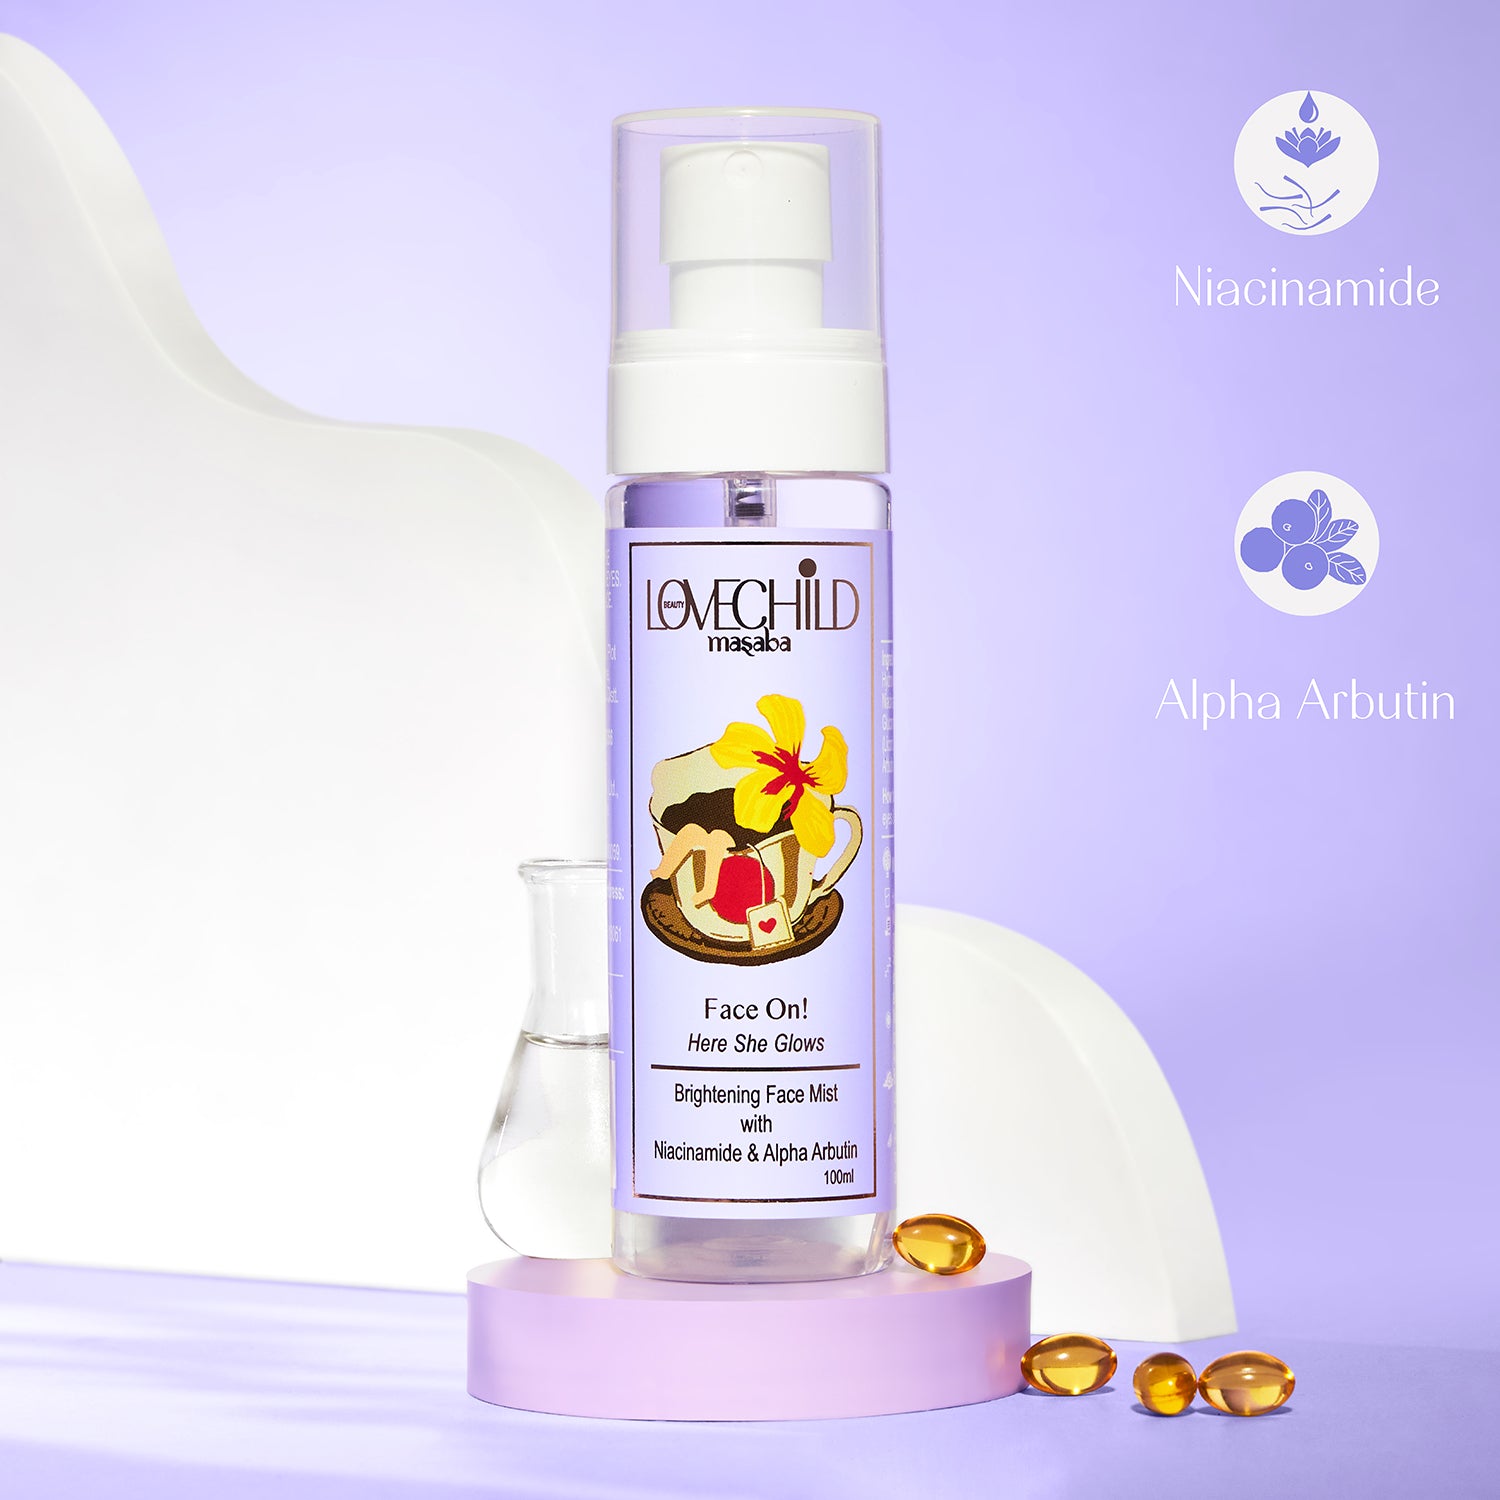 LoveChild Masaba - Face On! - Here She Glows! - Brightening Face Mist